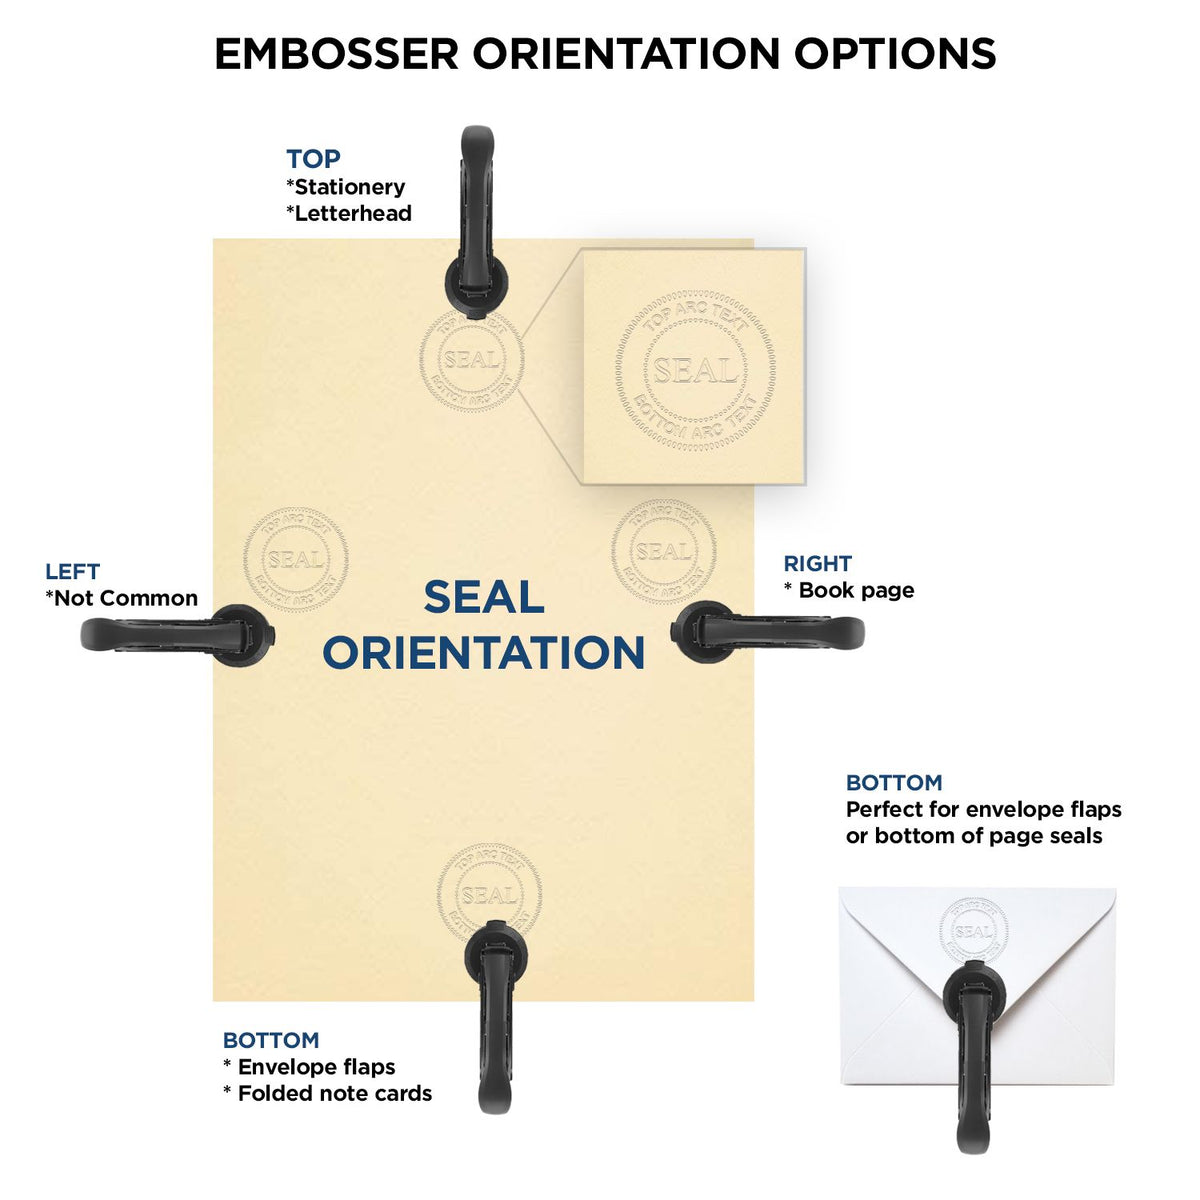 An infographic for the State of Texas Long Reach Architectural Embossing Seal showing embosser orientation, this is showing examples of a top, bottom, right and left insert.